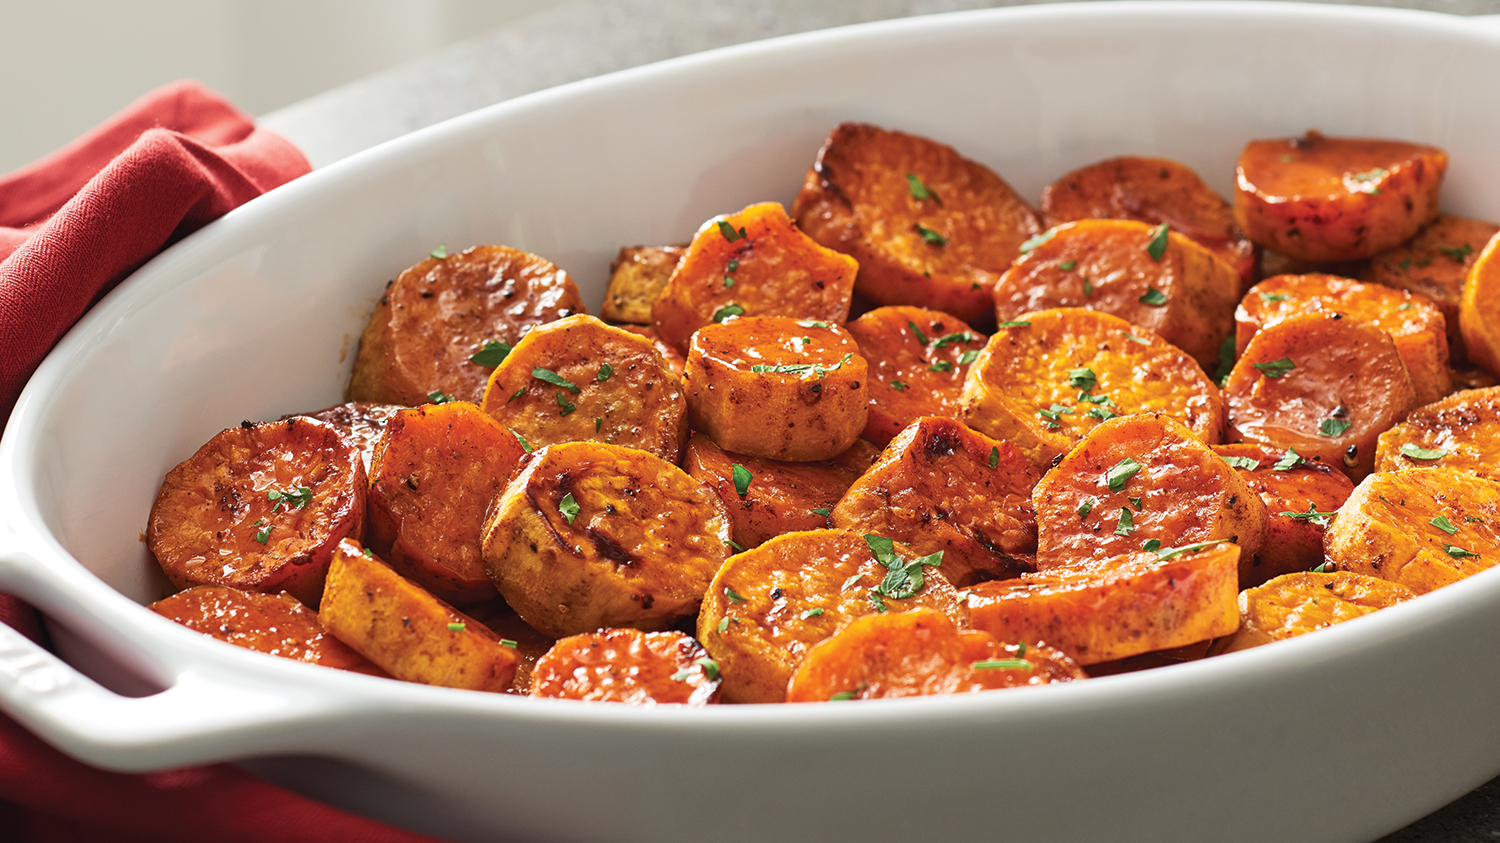 Make-Ahead Spiced & Candied Sweet Potato Slices - Safeway